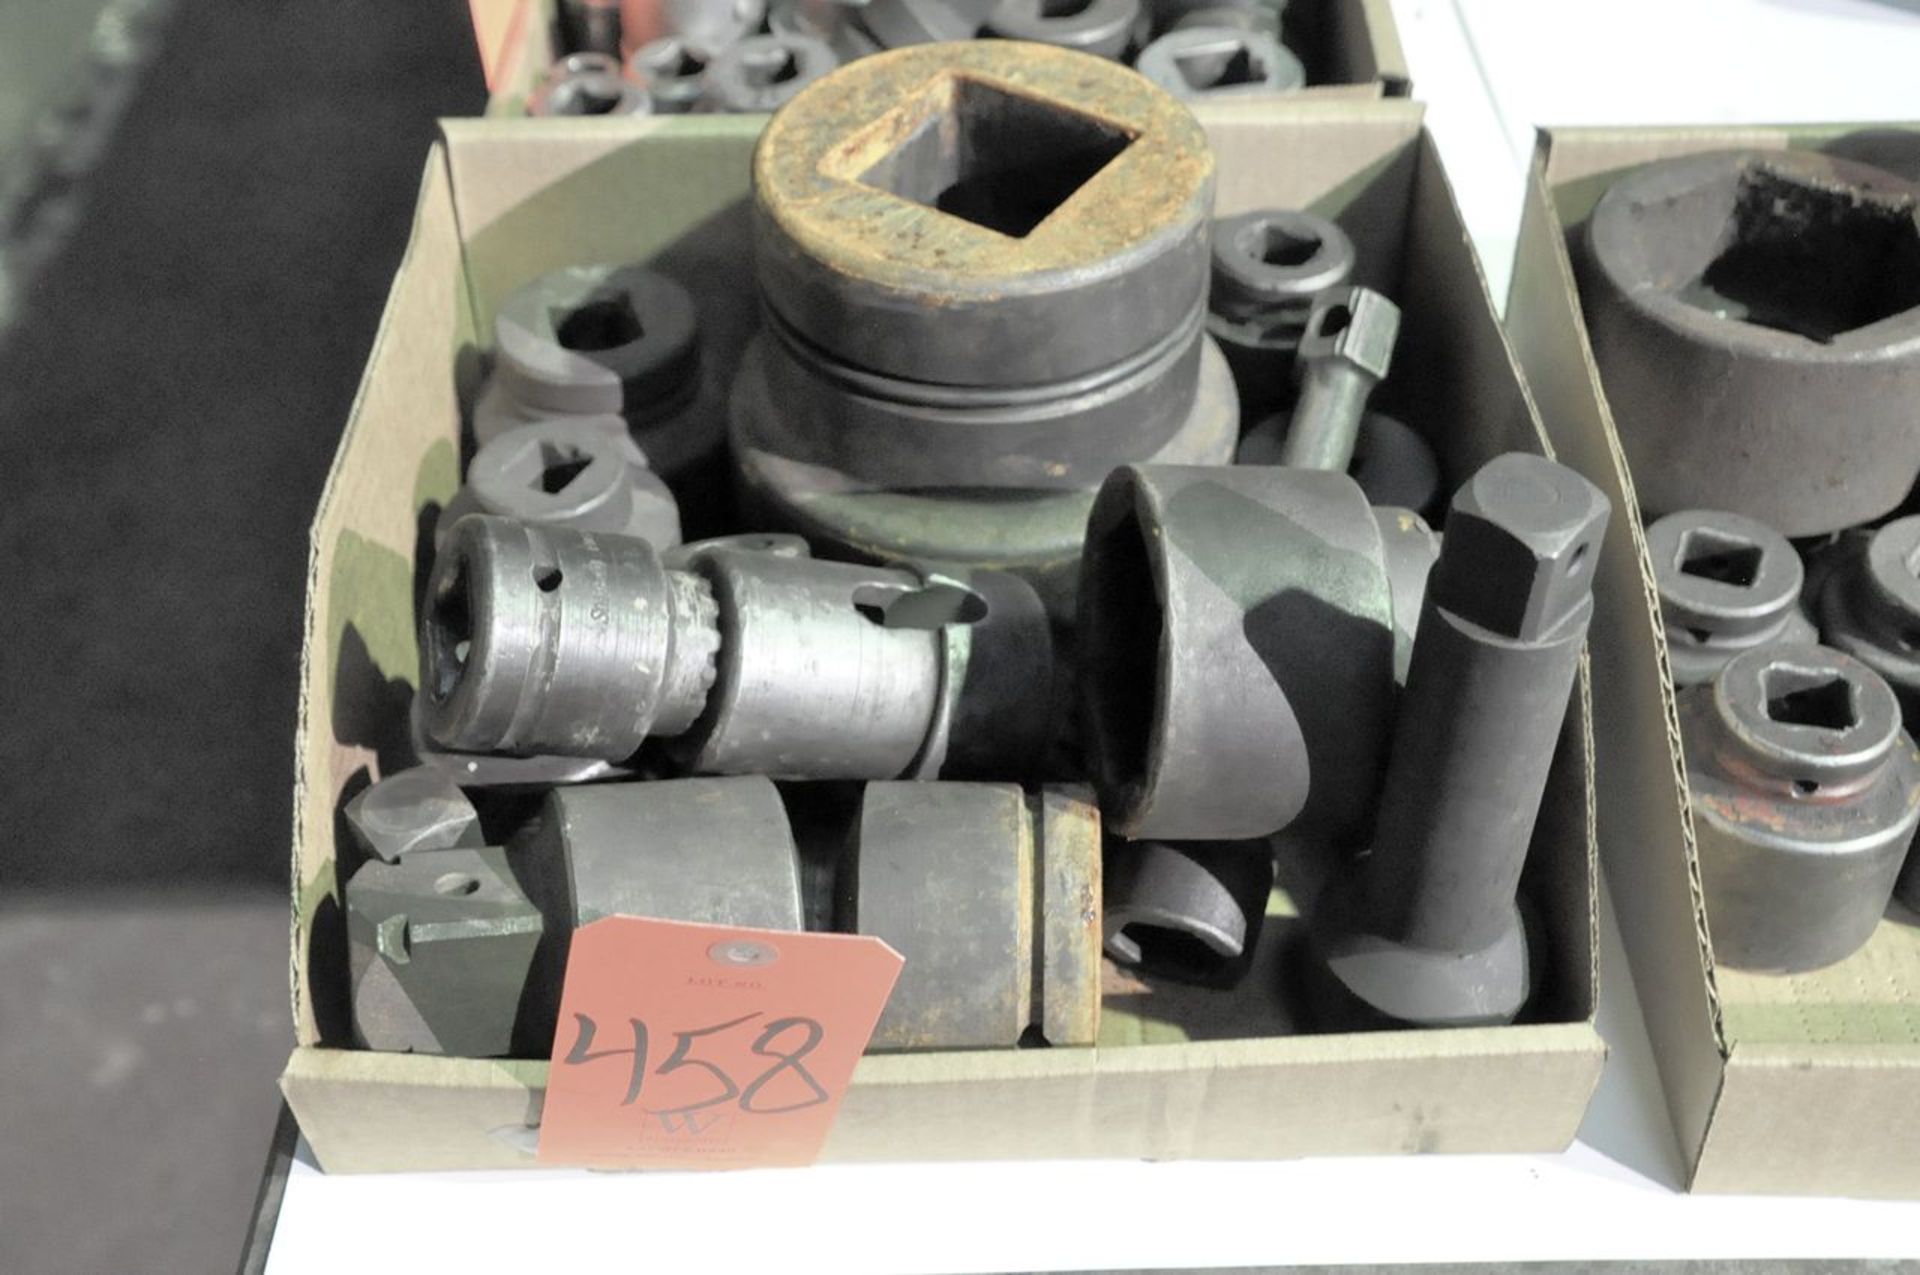 Lot - 3/4" and 1" Drive Sockets in (3) Boxes, (Machine Shop) - Image 4 of 4